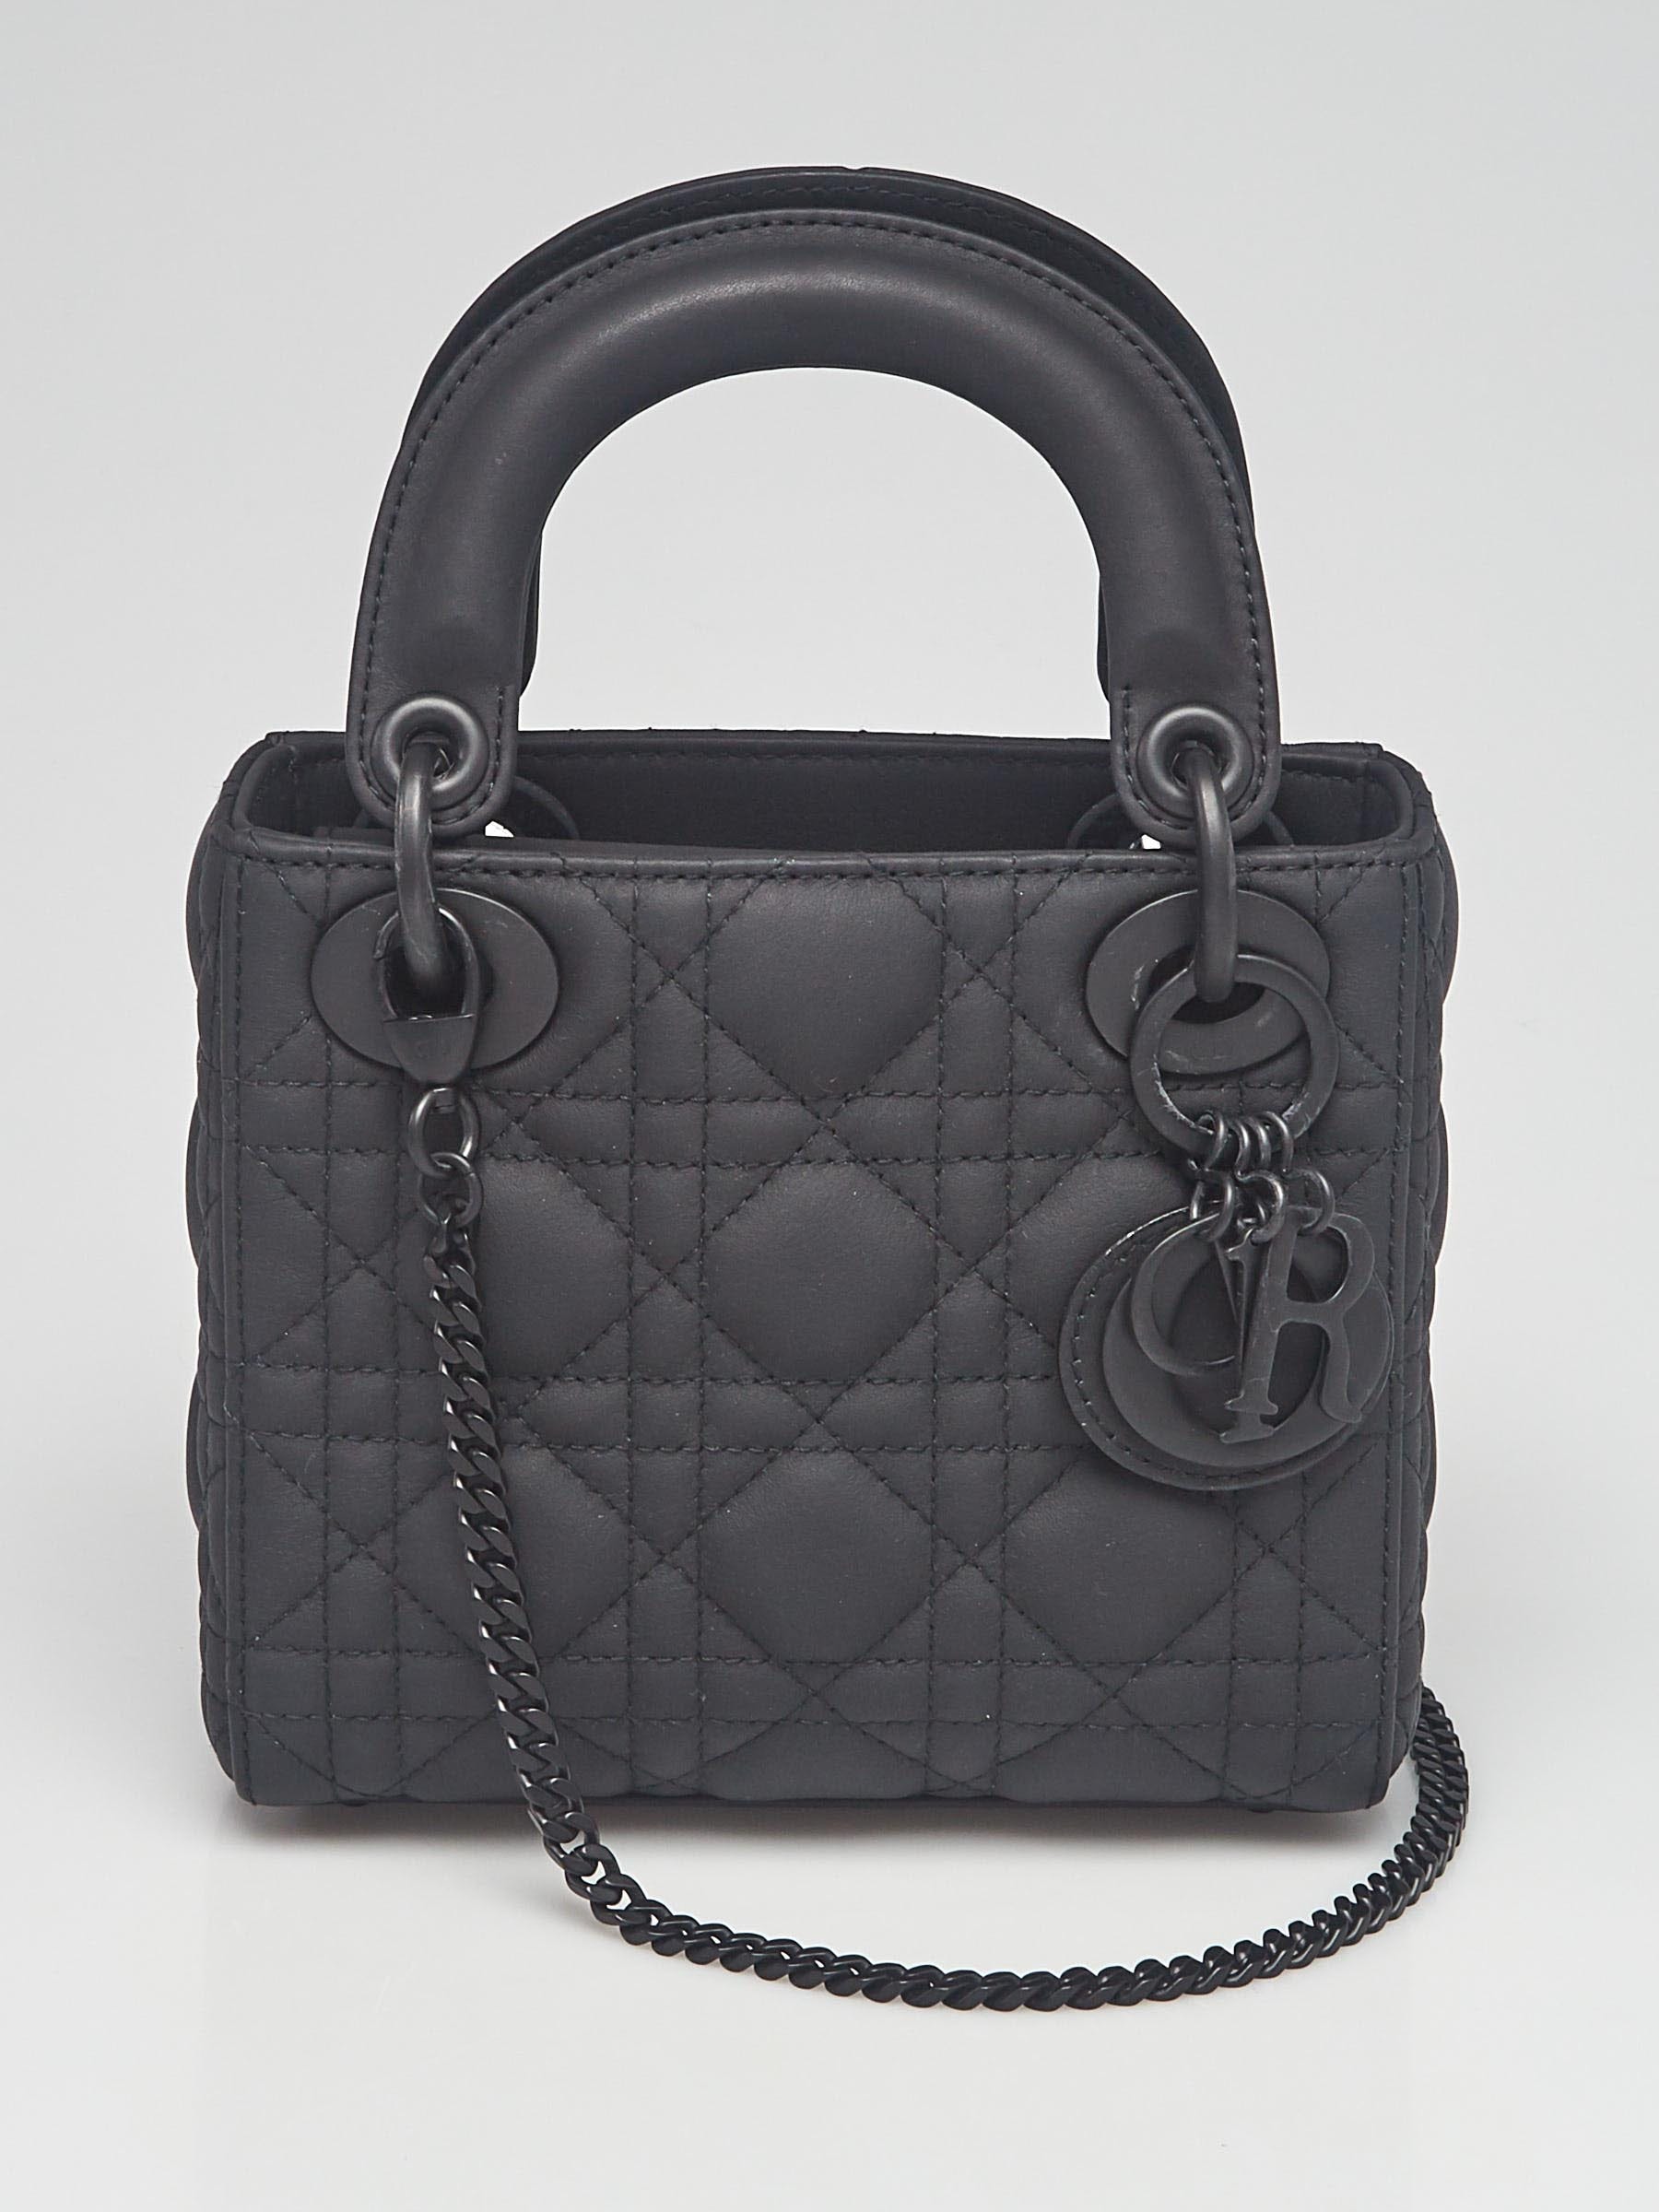 Double Top Handle Structured Bag - Ultra-Matte Black